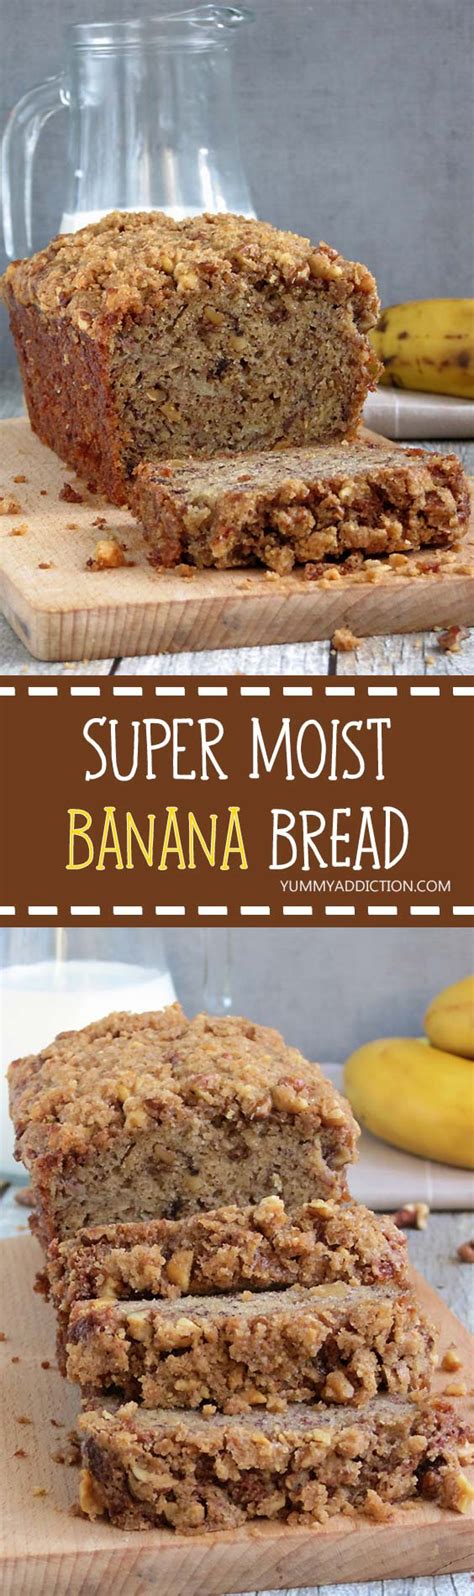 There's something particularly comforting about the familiar aroma of banana bread wafting from the kitchen. Moist Banana Bread - w/ Crunchy Streusel Topping